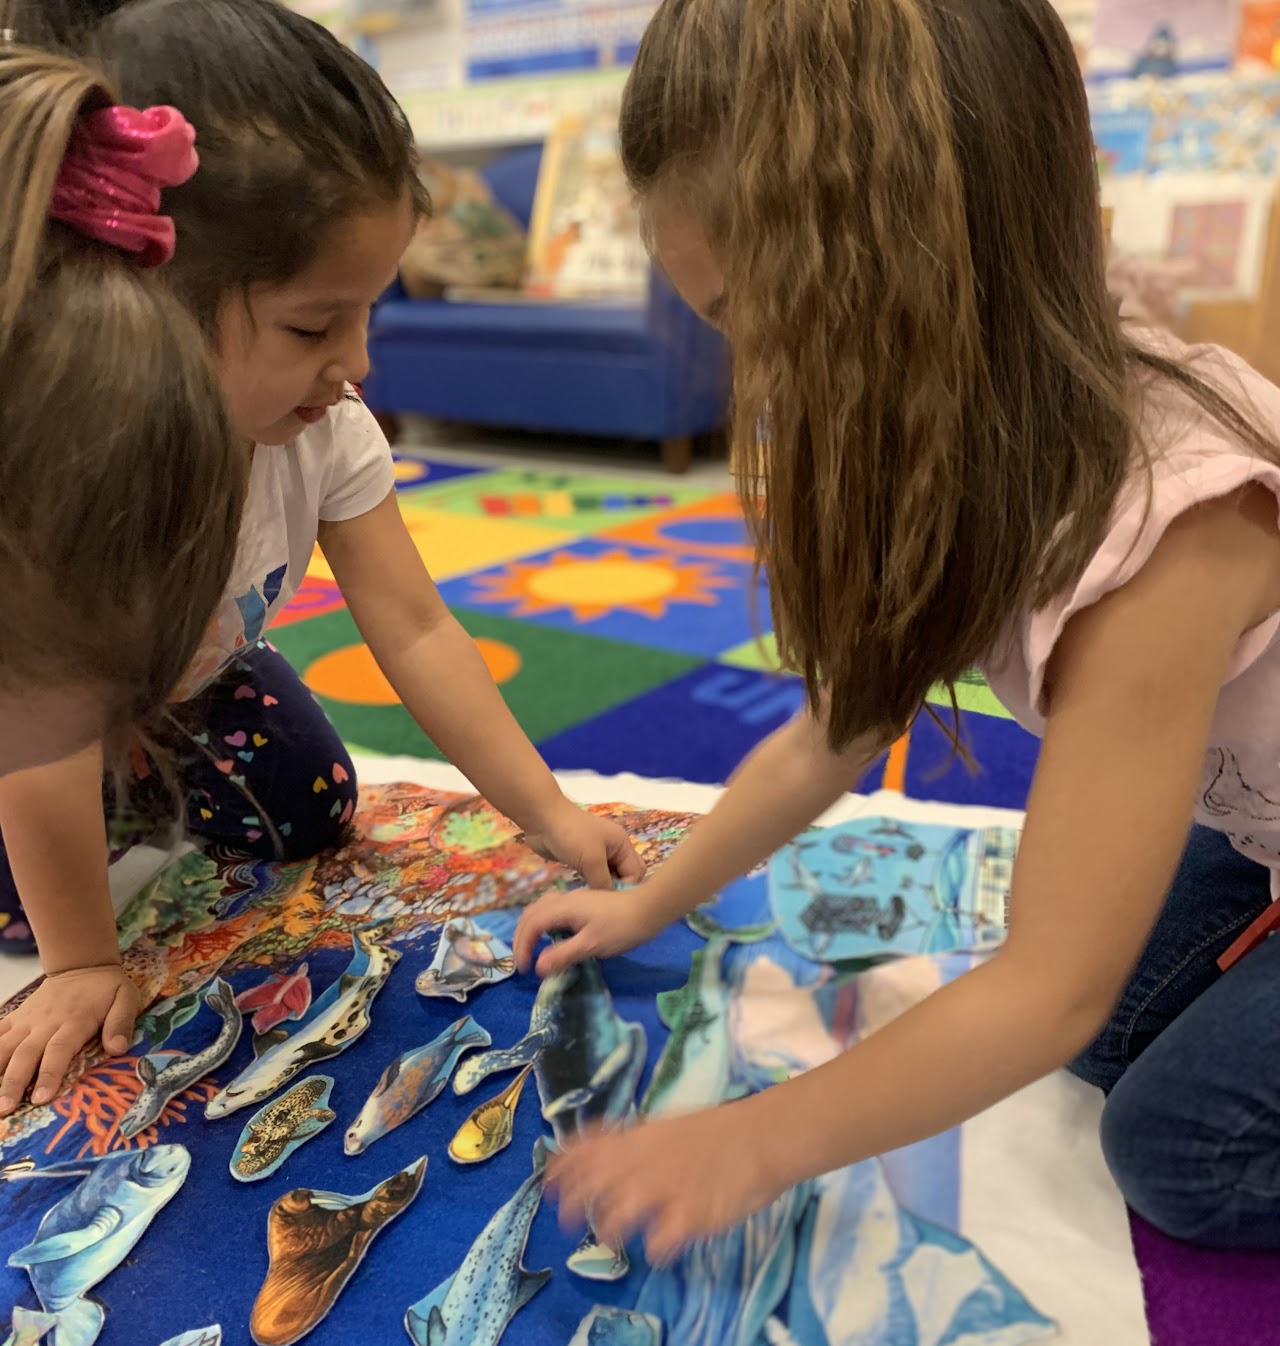 Pre-K students playing with toys